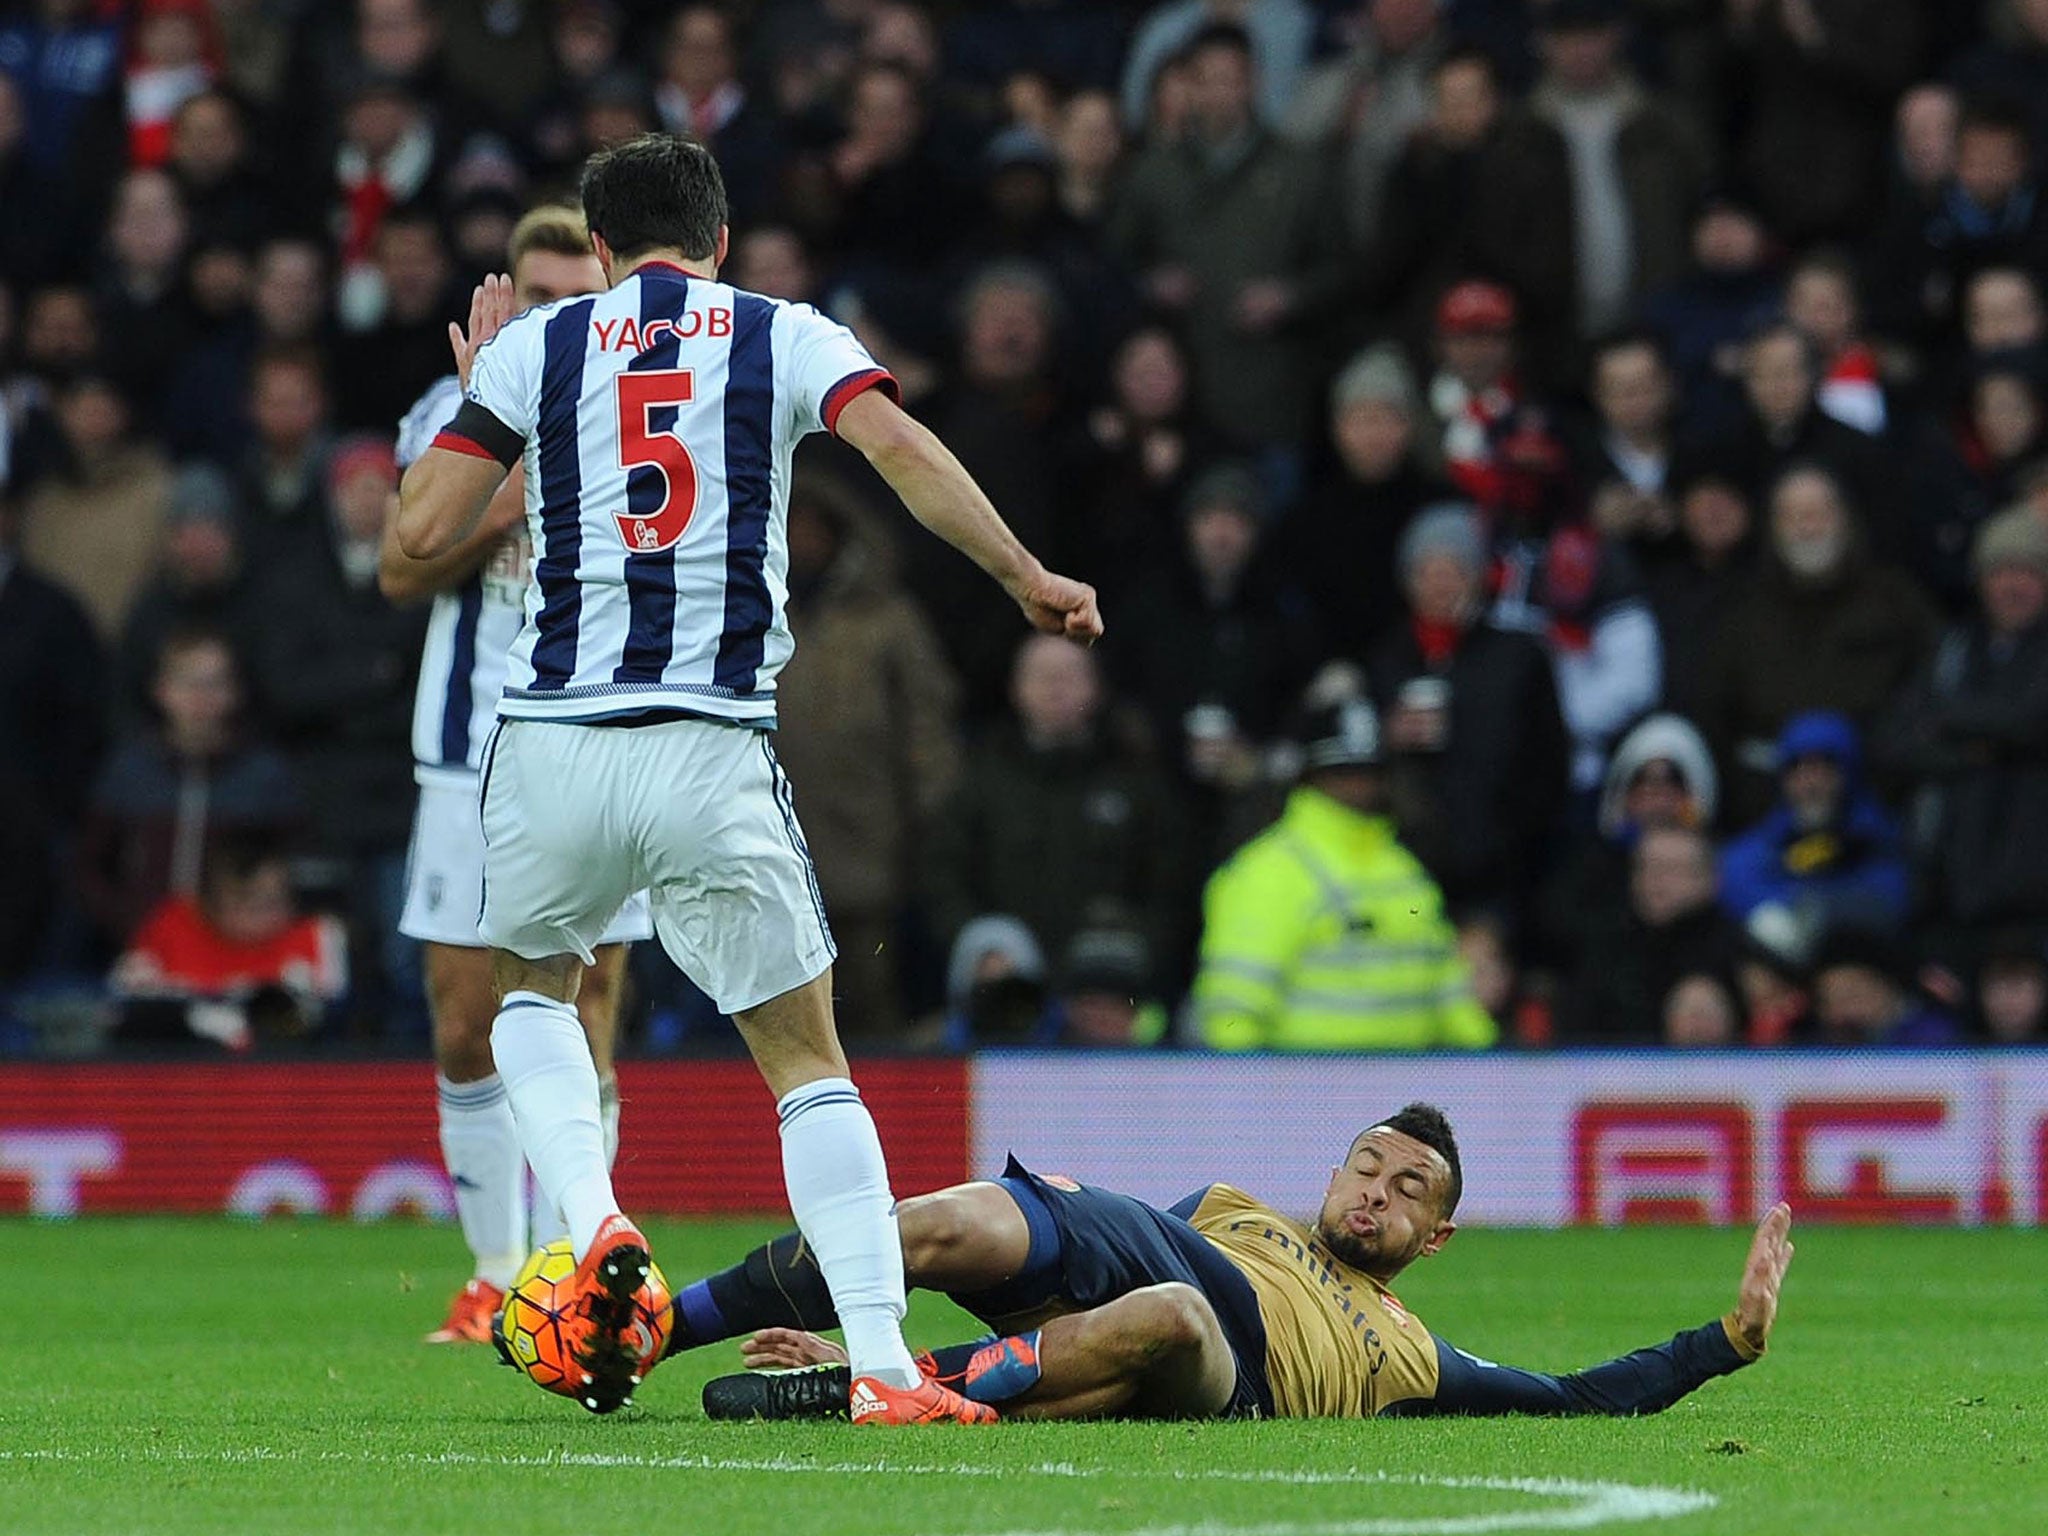 Francis Coquelin slide the ball and suffers knee ligament damage in West Brom defeat